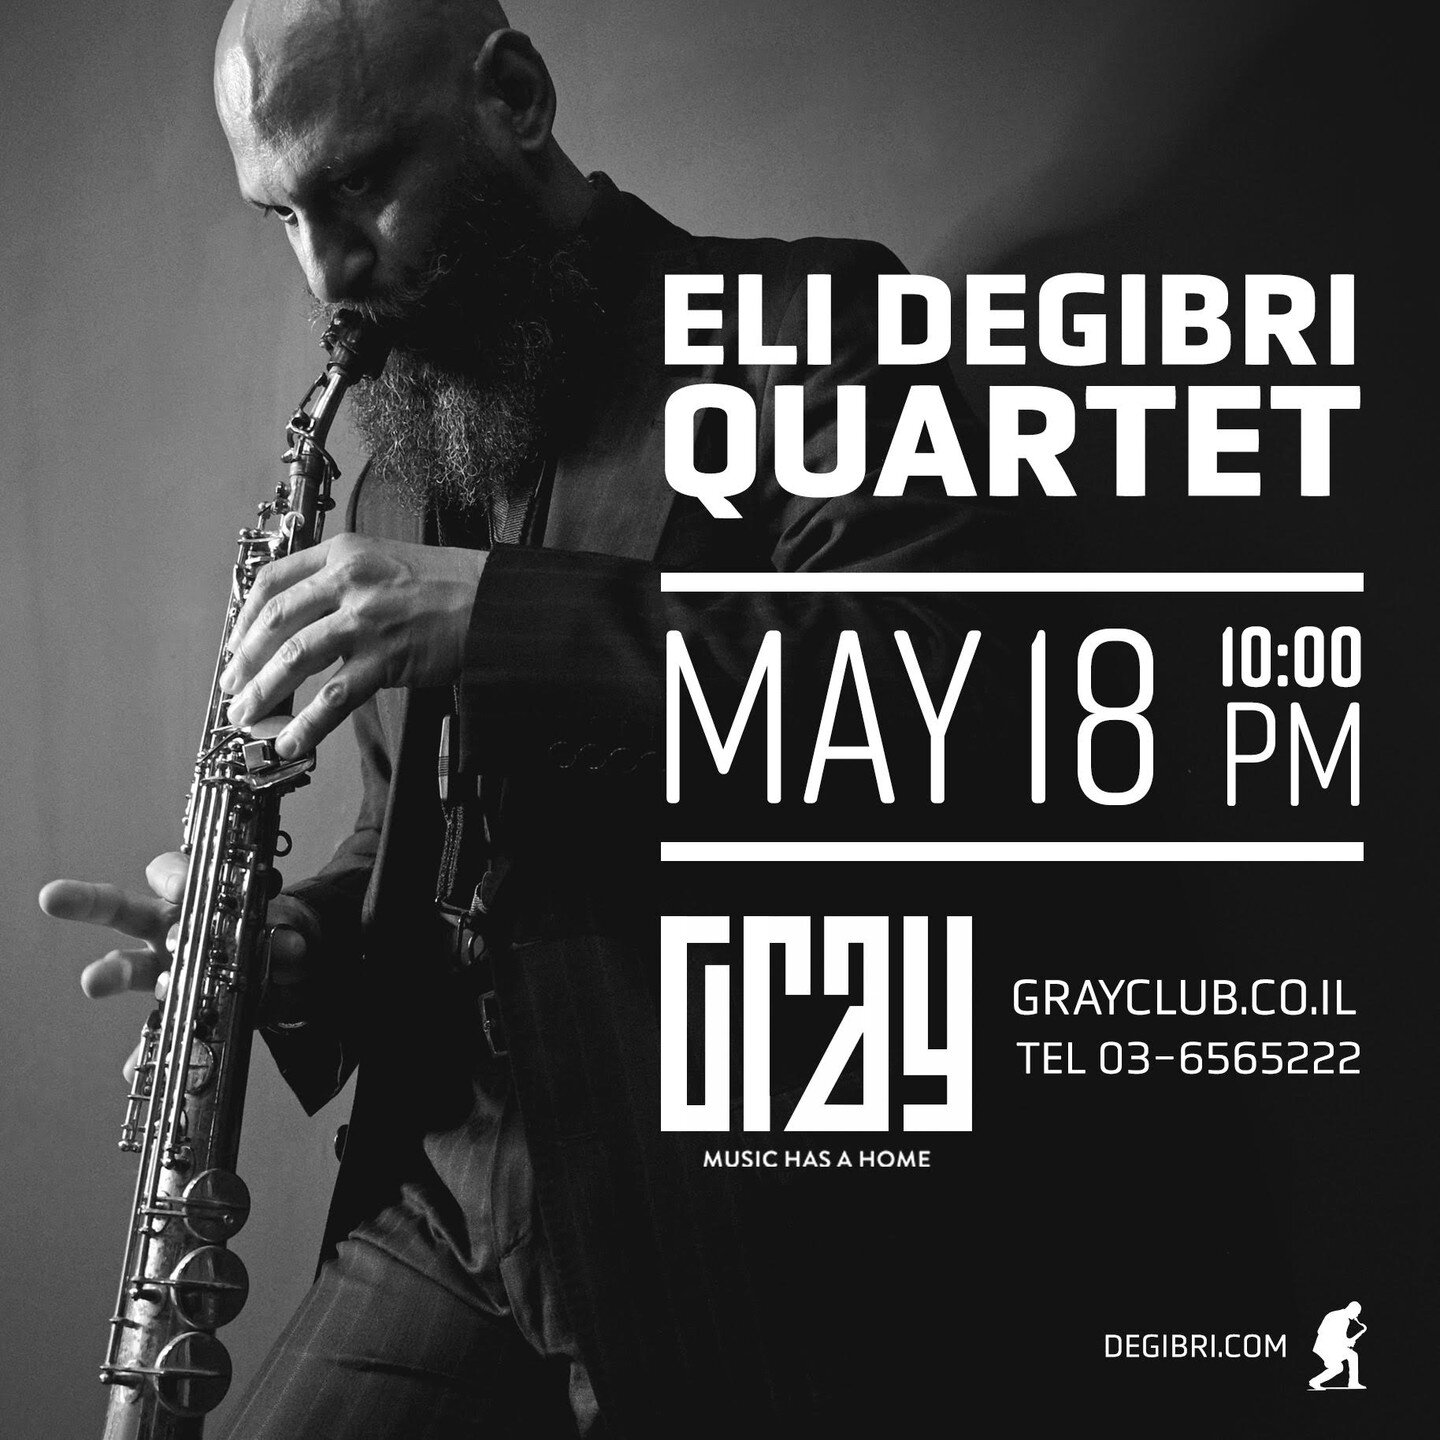 Back in TLV for one night only, the Eli Degibri Quartet! On May 18th at @graybarmusic! 
.
Get your tickets now before it's too late! You do not want to miss the magic of this quartet. As the @nytimes best said, &quot;Don't Miss Him.&quot; 🎷🔥❤️🤩
.
